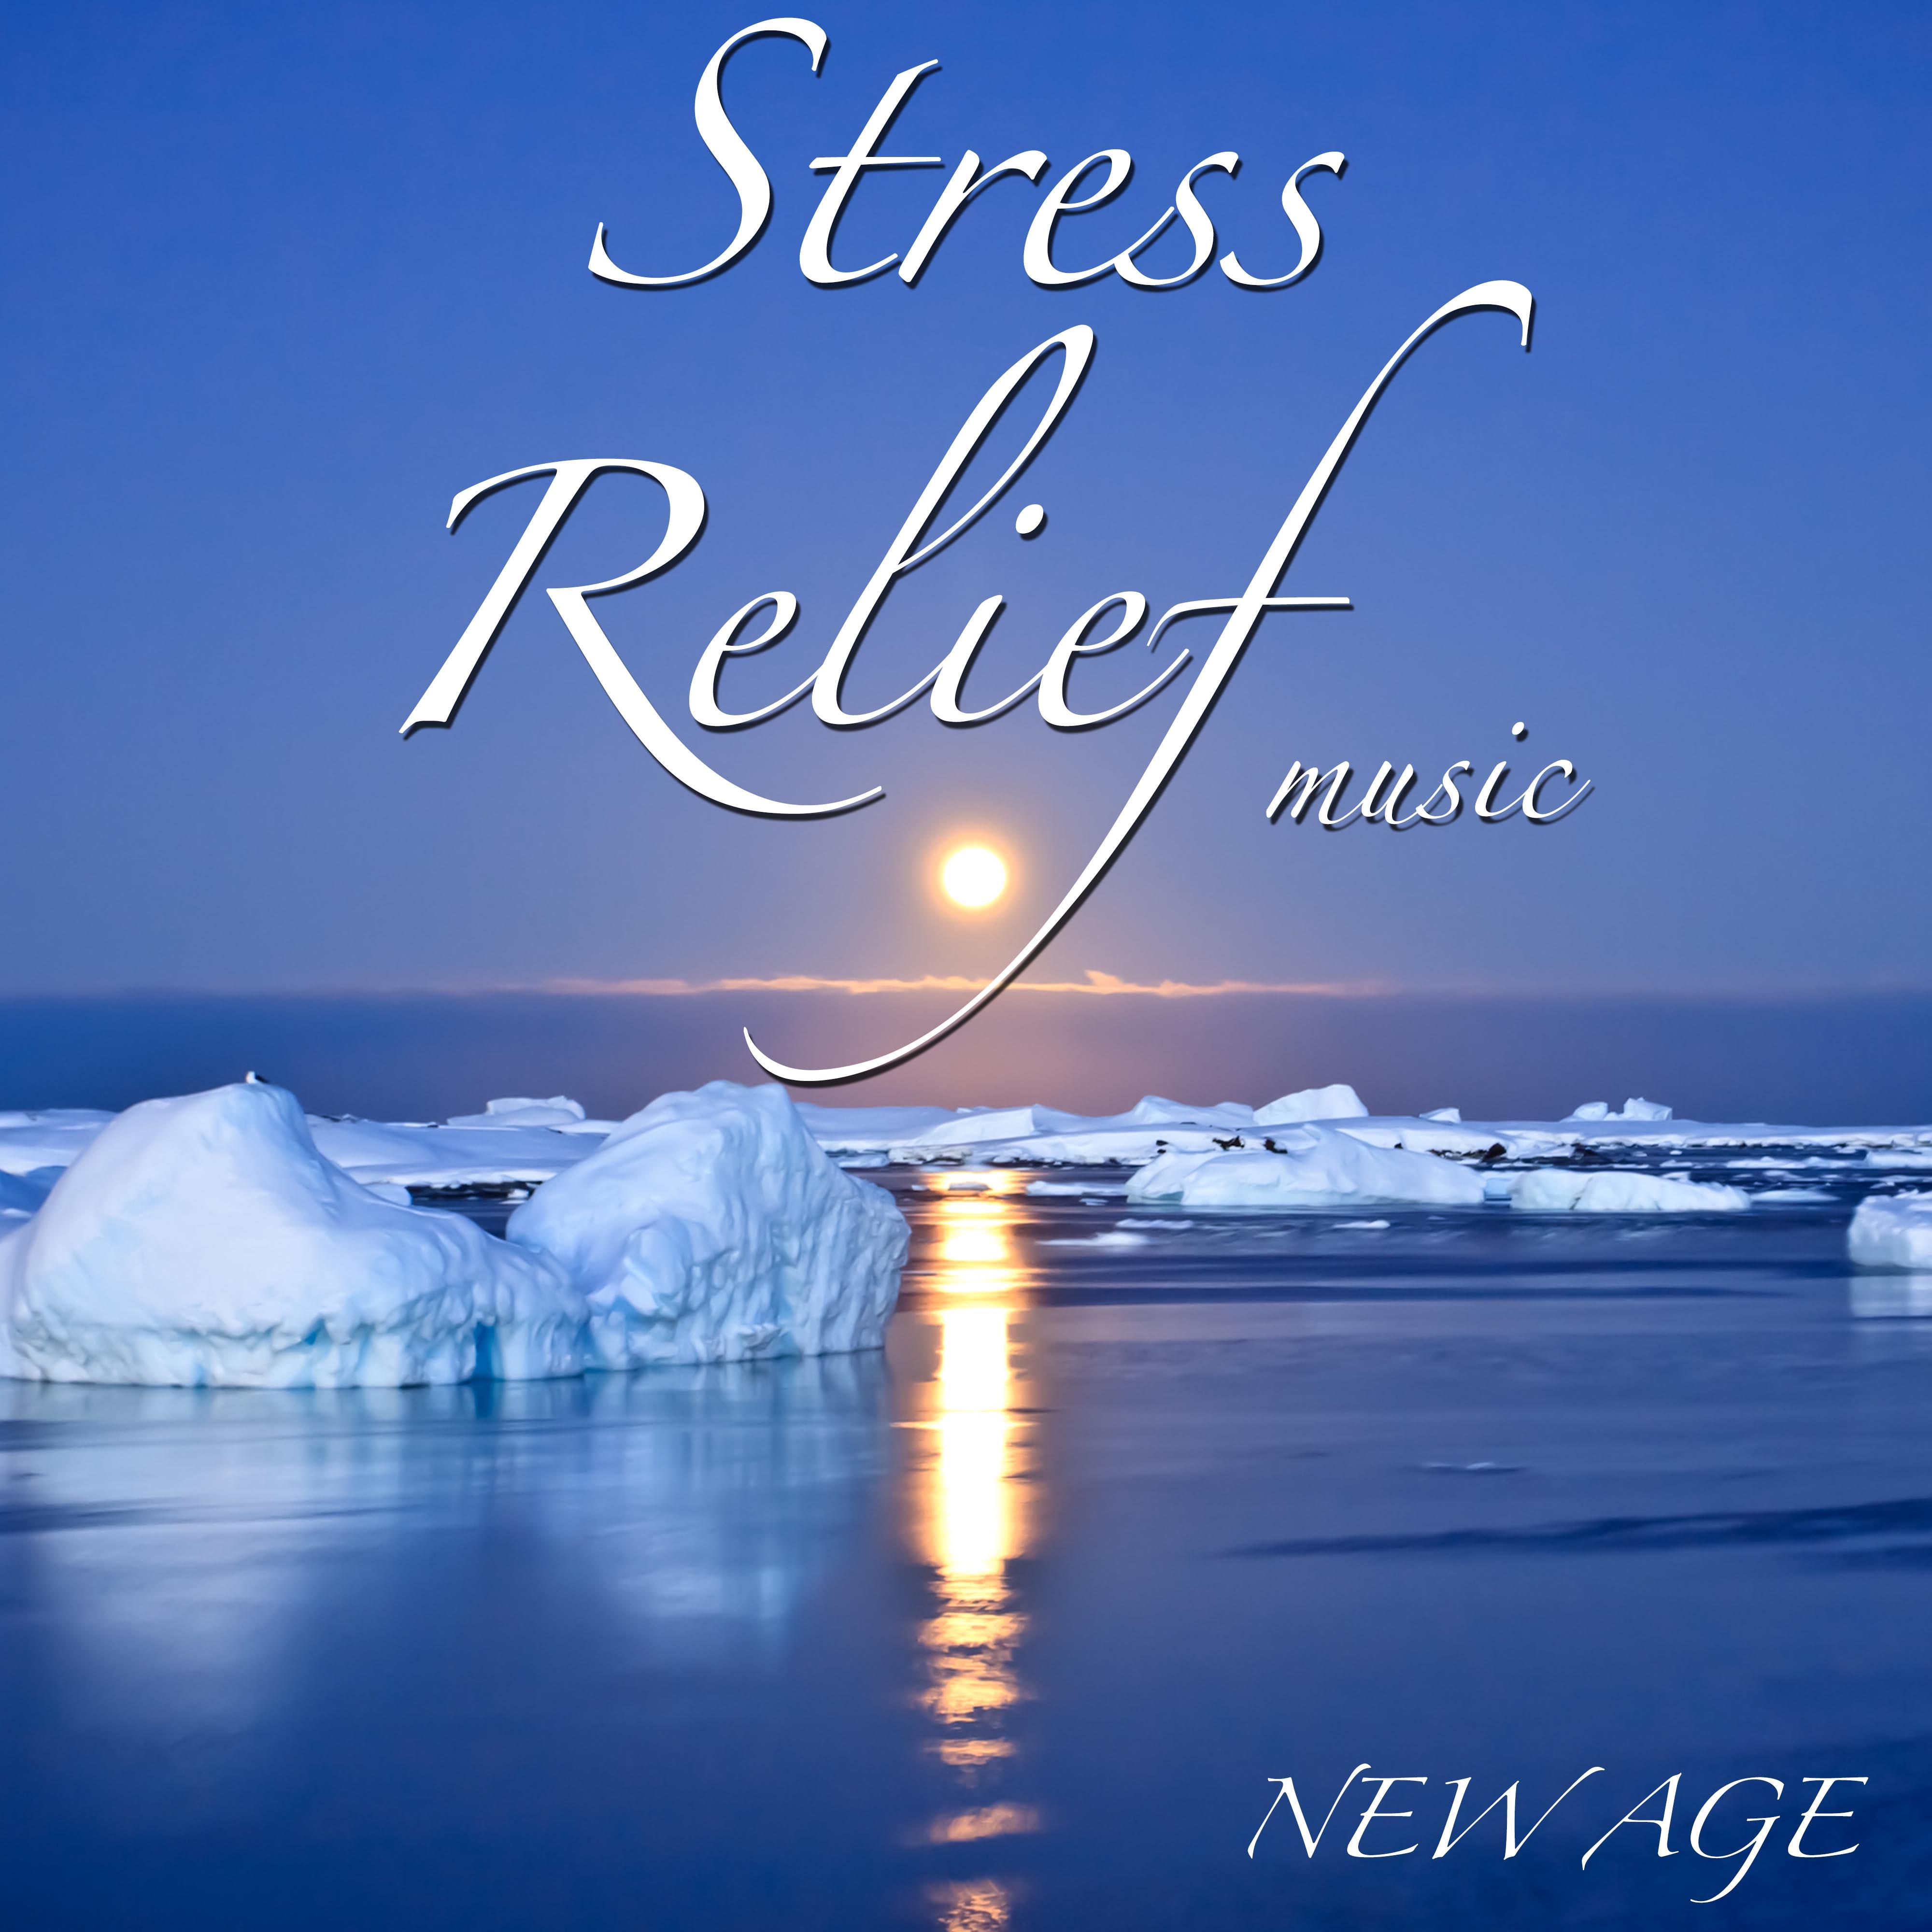 Stress Relief: the Best Playlists to Calm an Agitated Mind, Find Inner Peace and Serenity in your Life with Shakuhachi Flute, Harp, Rain and Sea Sound Effects